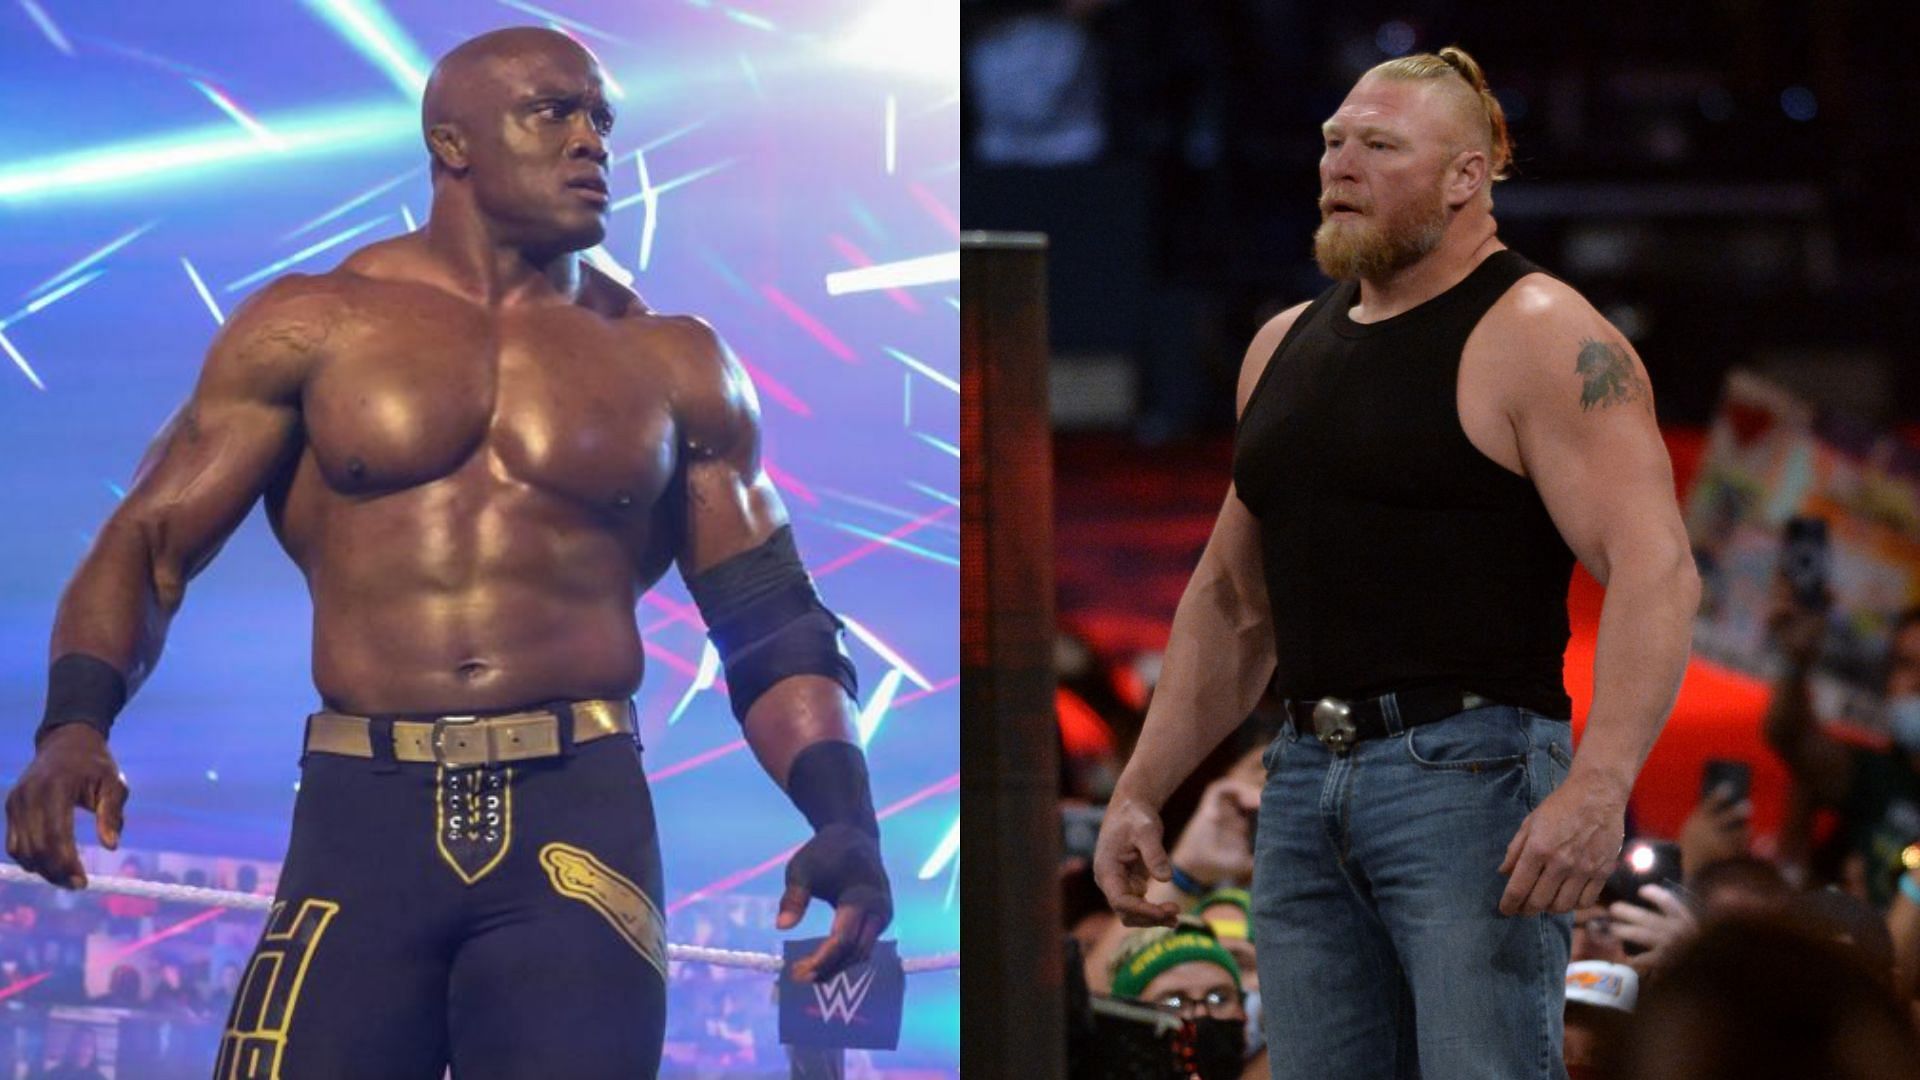 Brock Lesnar may return tonight to set up a rubber match between the two juggernauts.